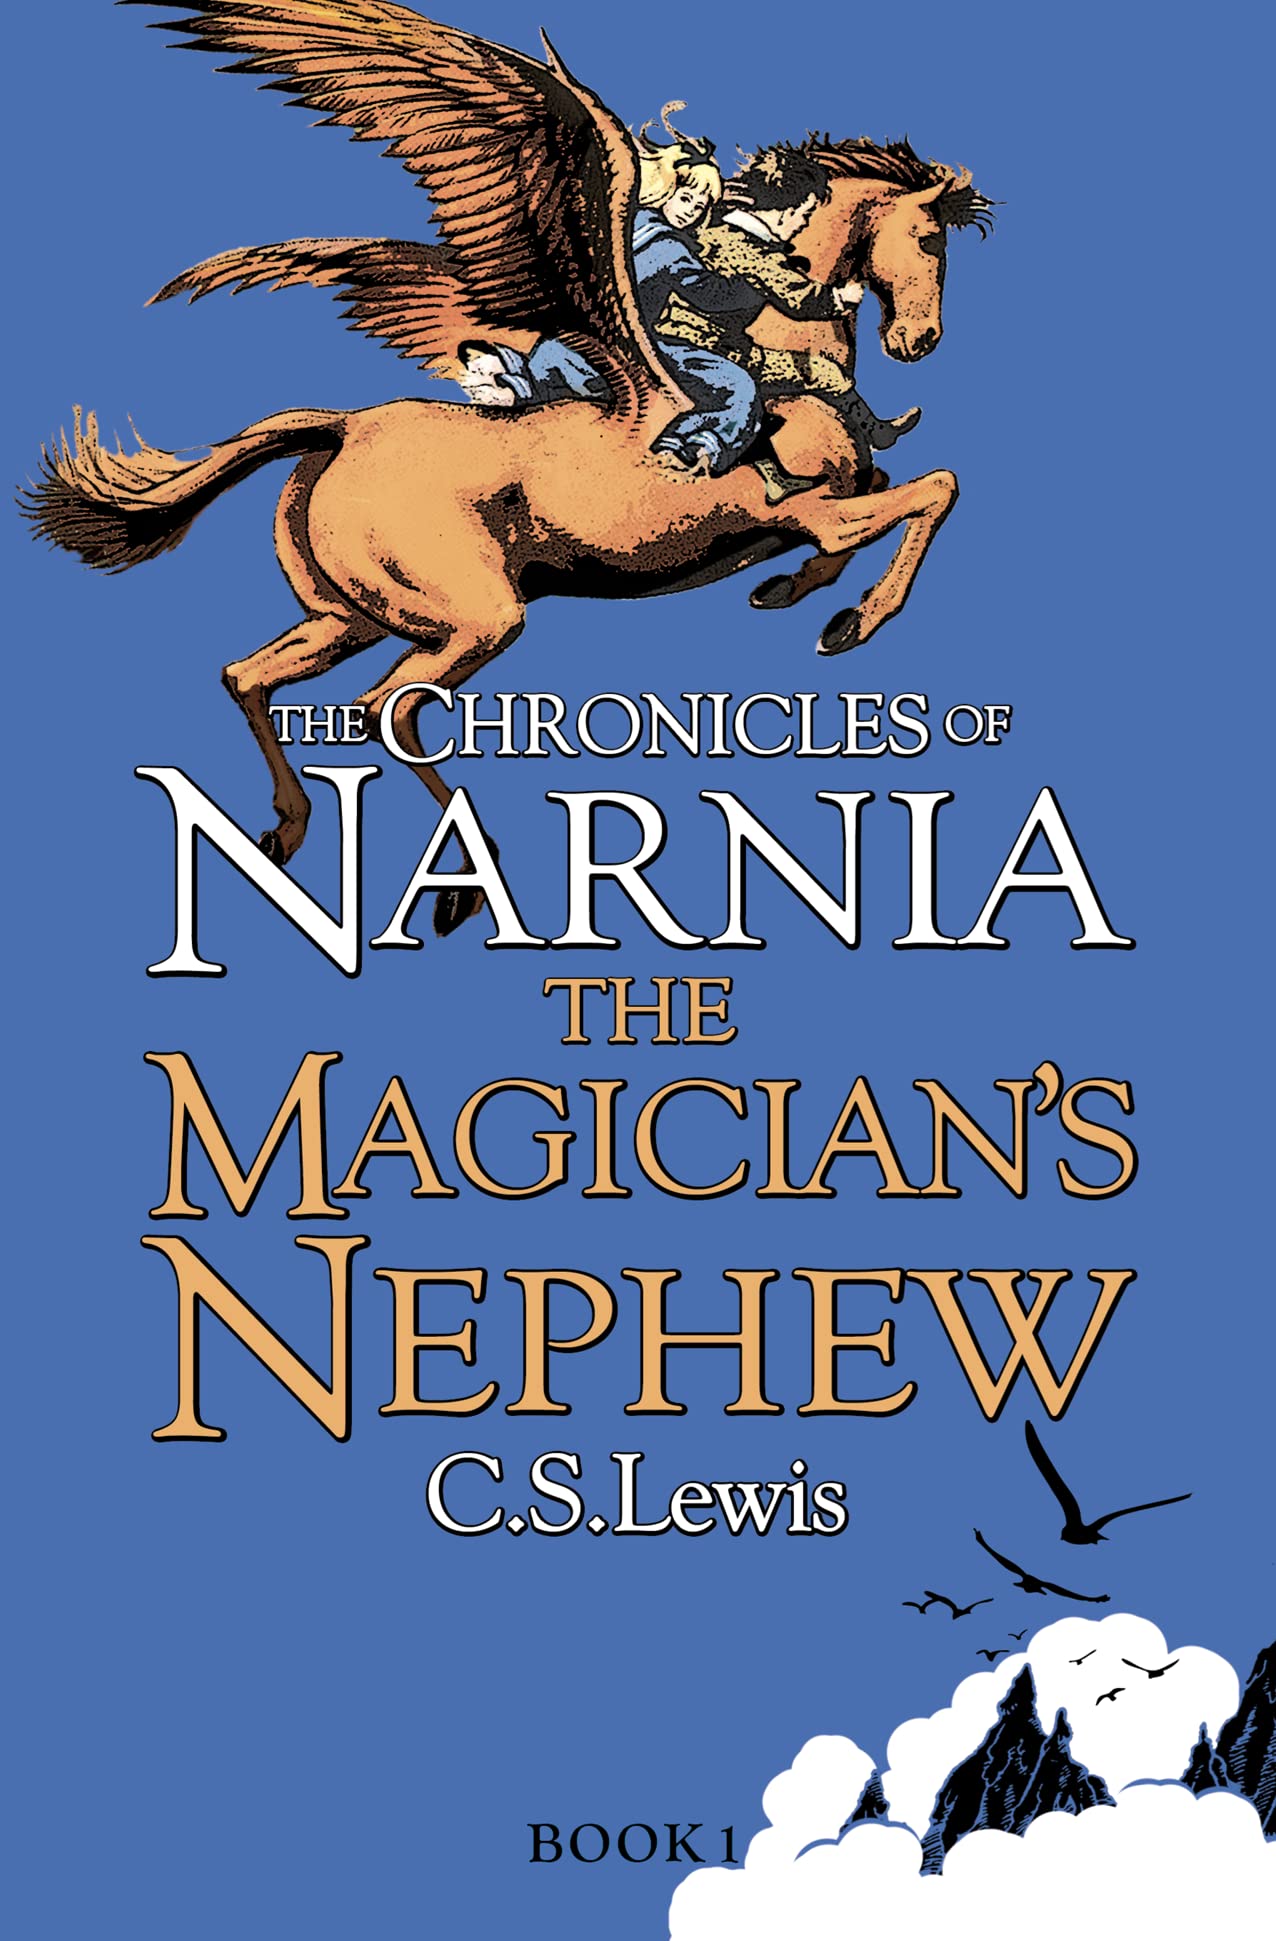 The Magician’s Nephew: (The Chronicles of Narnia)